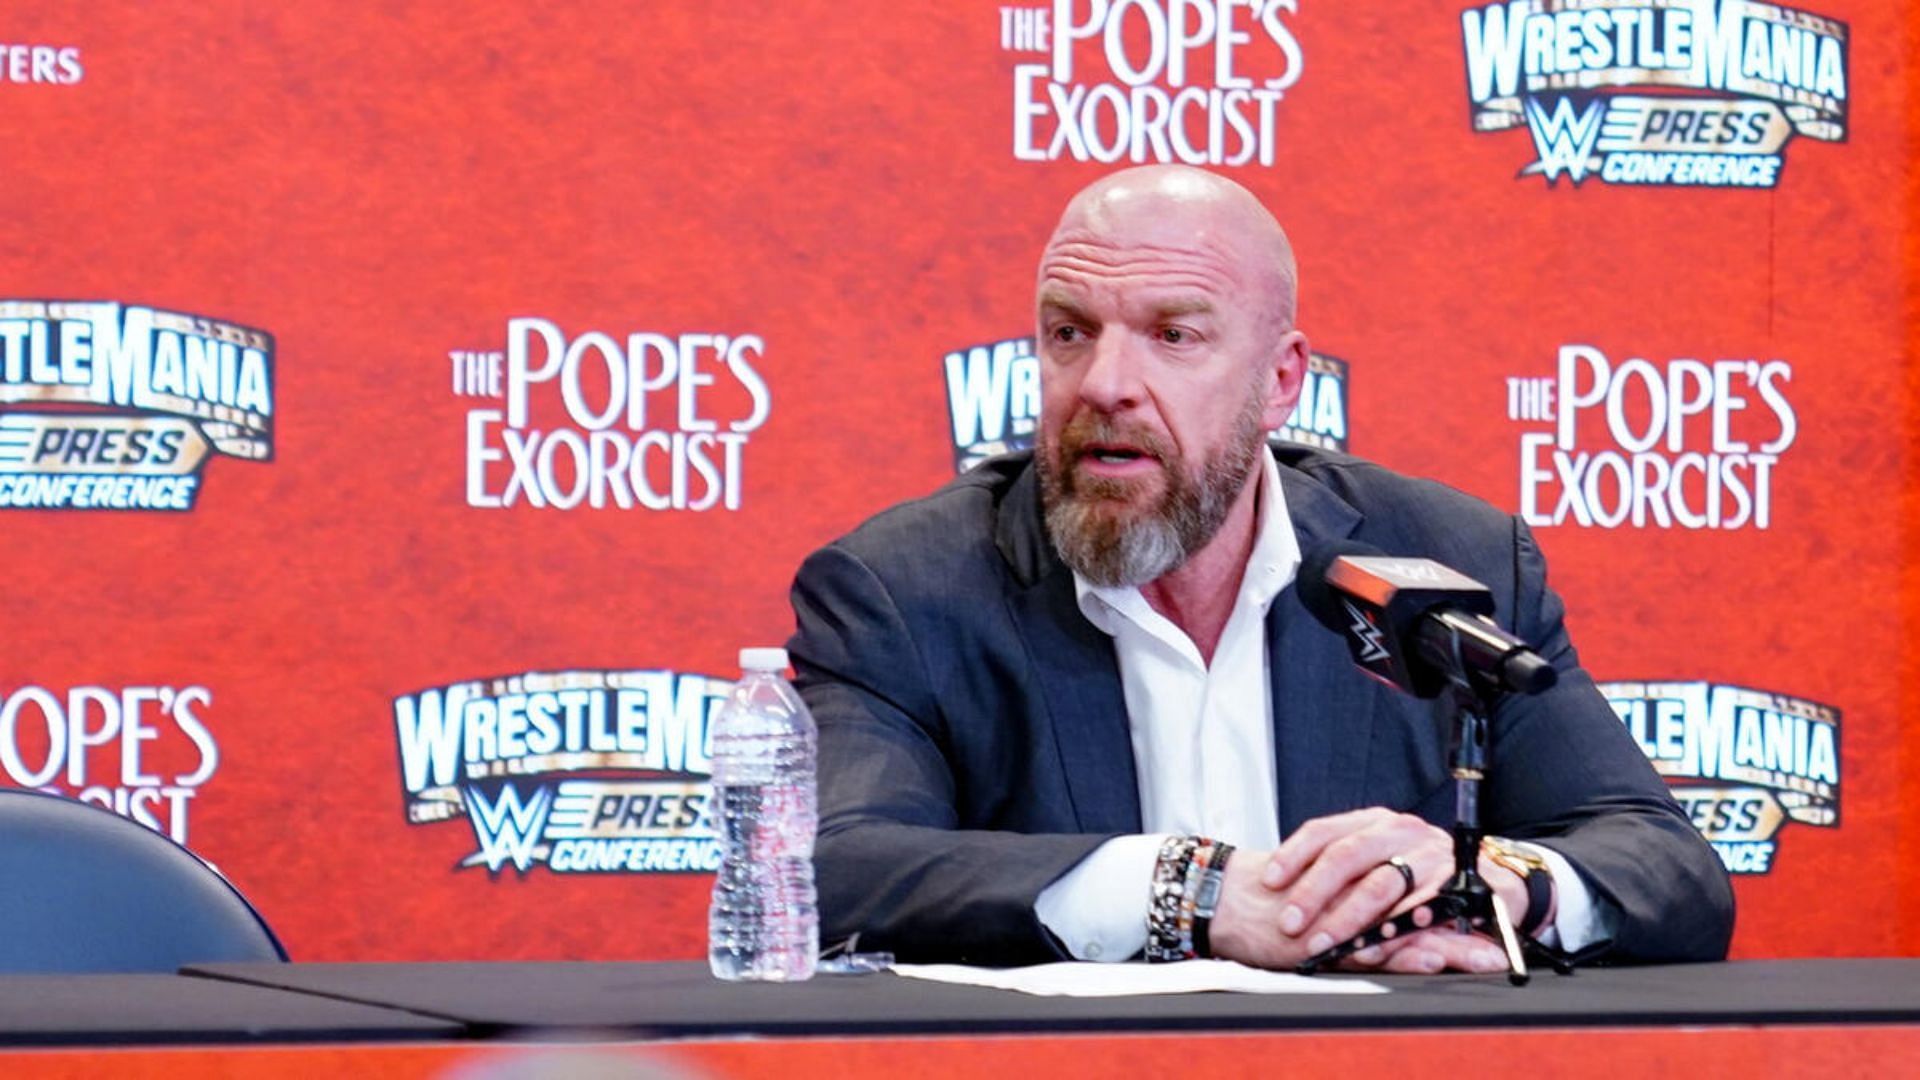 WWE Chief Content Officer Triple H (Image credit: WWE)